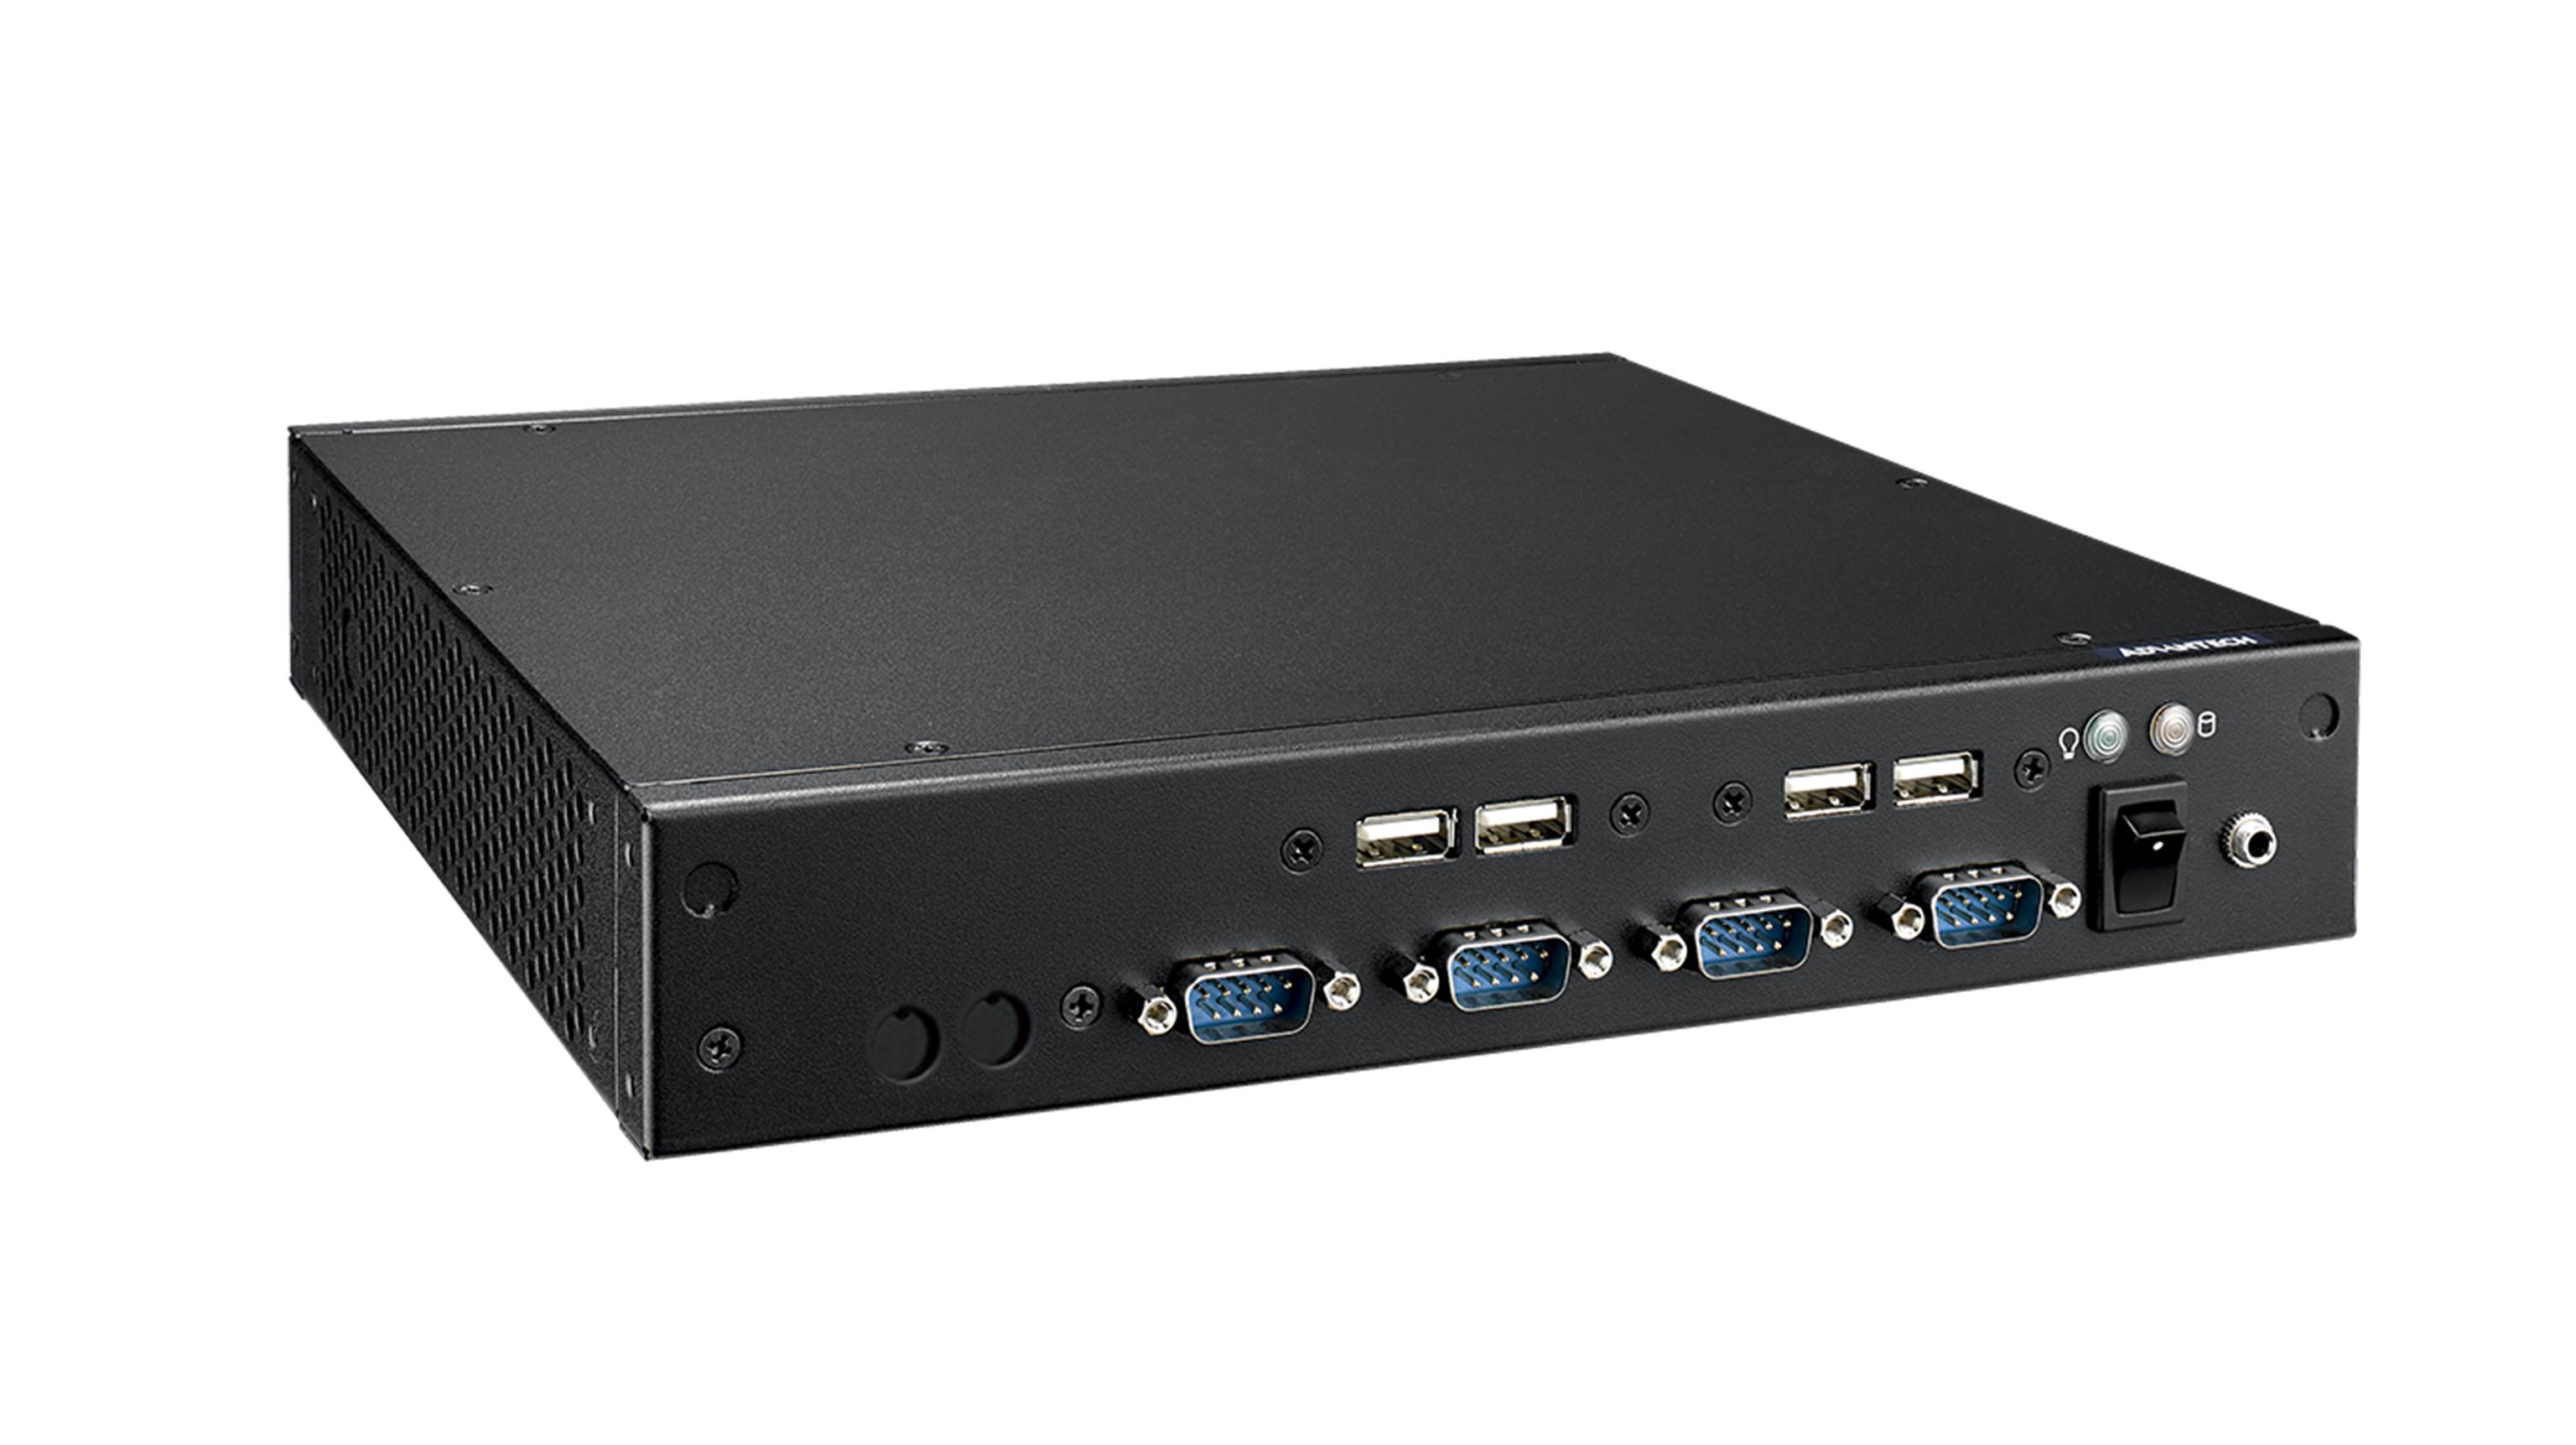 Fan-base Embedded Computer EPC-T2286 barebone with Intel Core i7-8700 (65W), 4x USB, 4x COM, up to 2x Antennas, DP/HDMI and CE / FCC / CCC certifications.